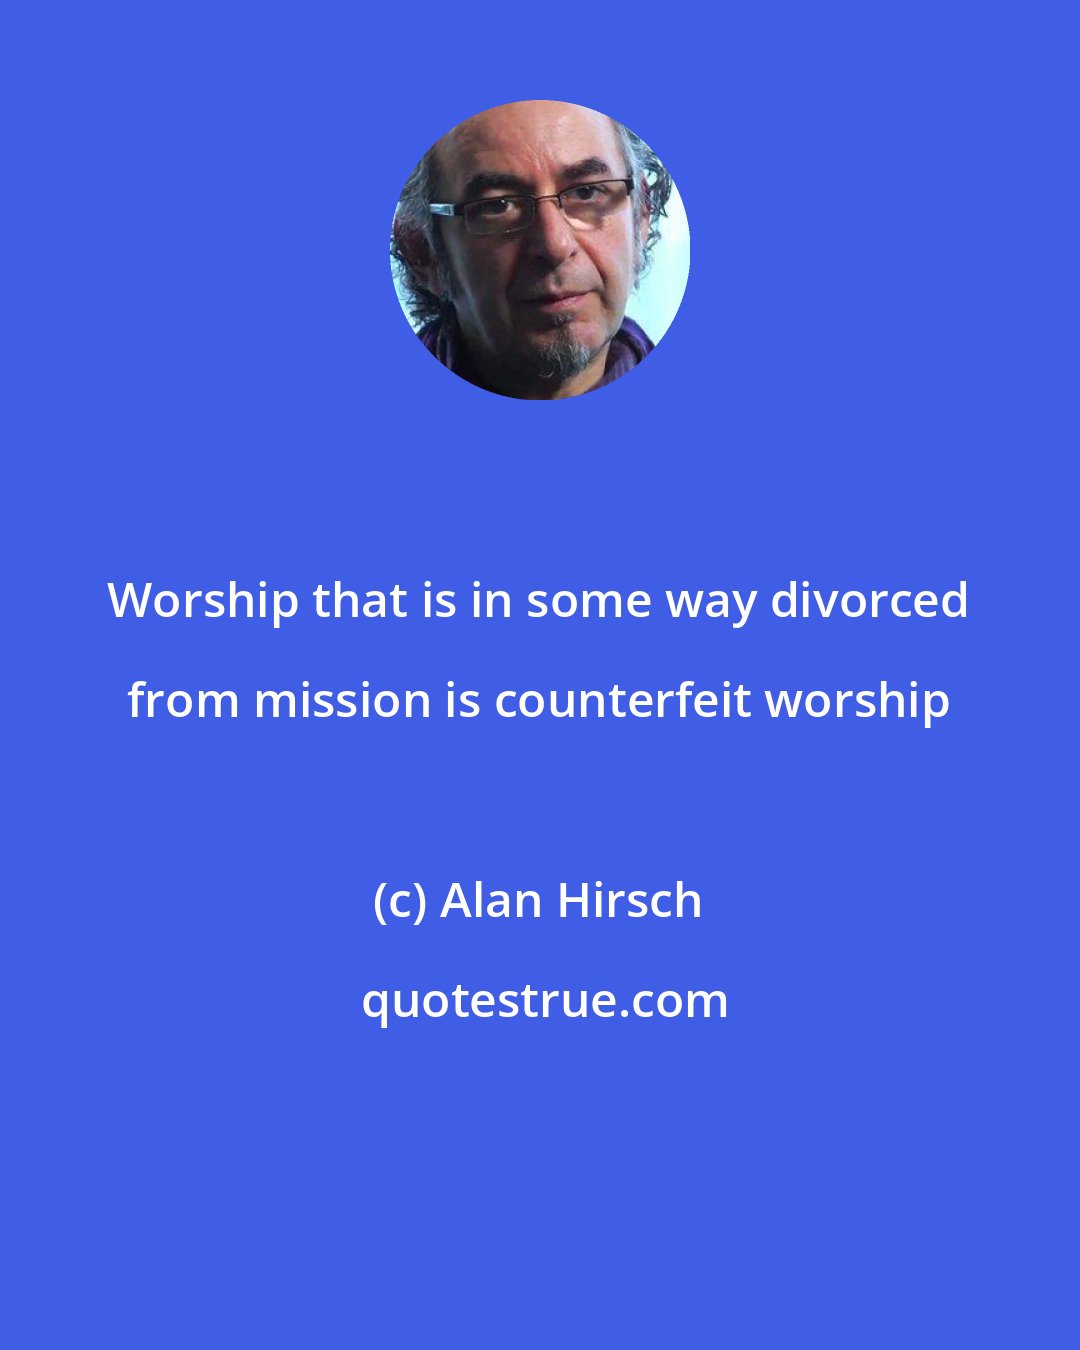 Alan Hirsch: Worship that is in some way divorced from mission is counterfeit worship